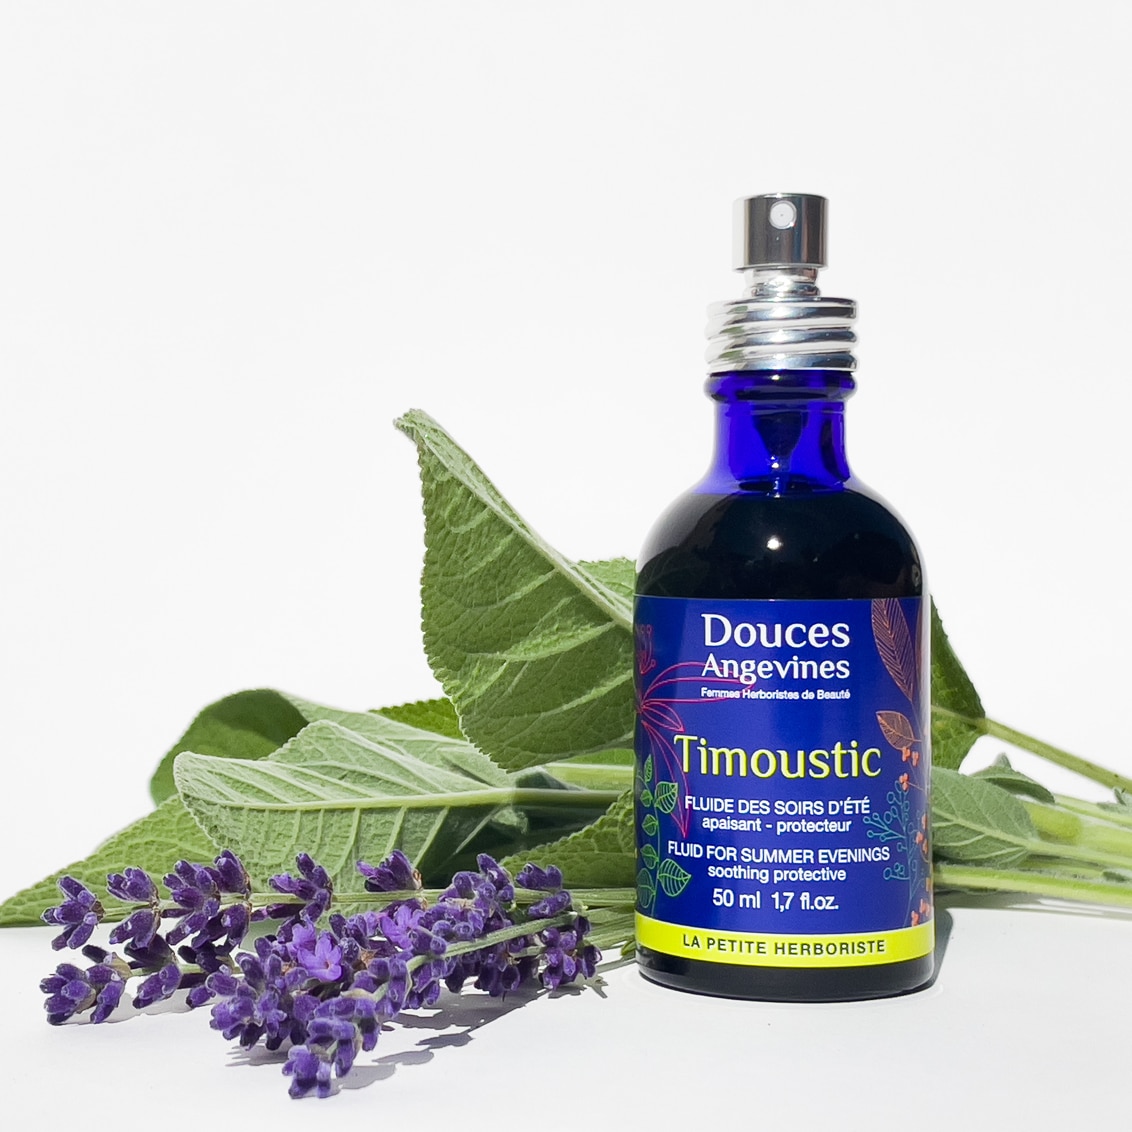 Timoustic lotion apaisante et protectrice bio - Douces Angevines